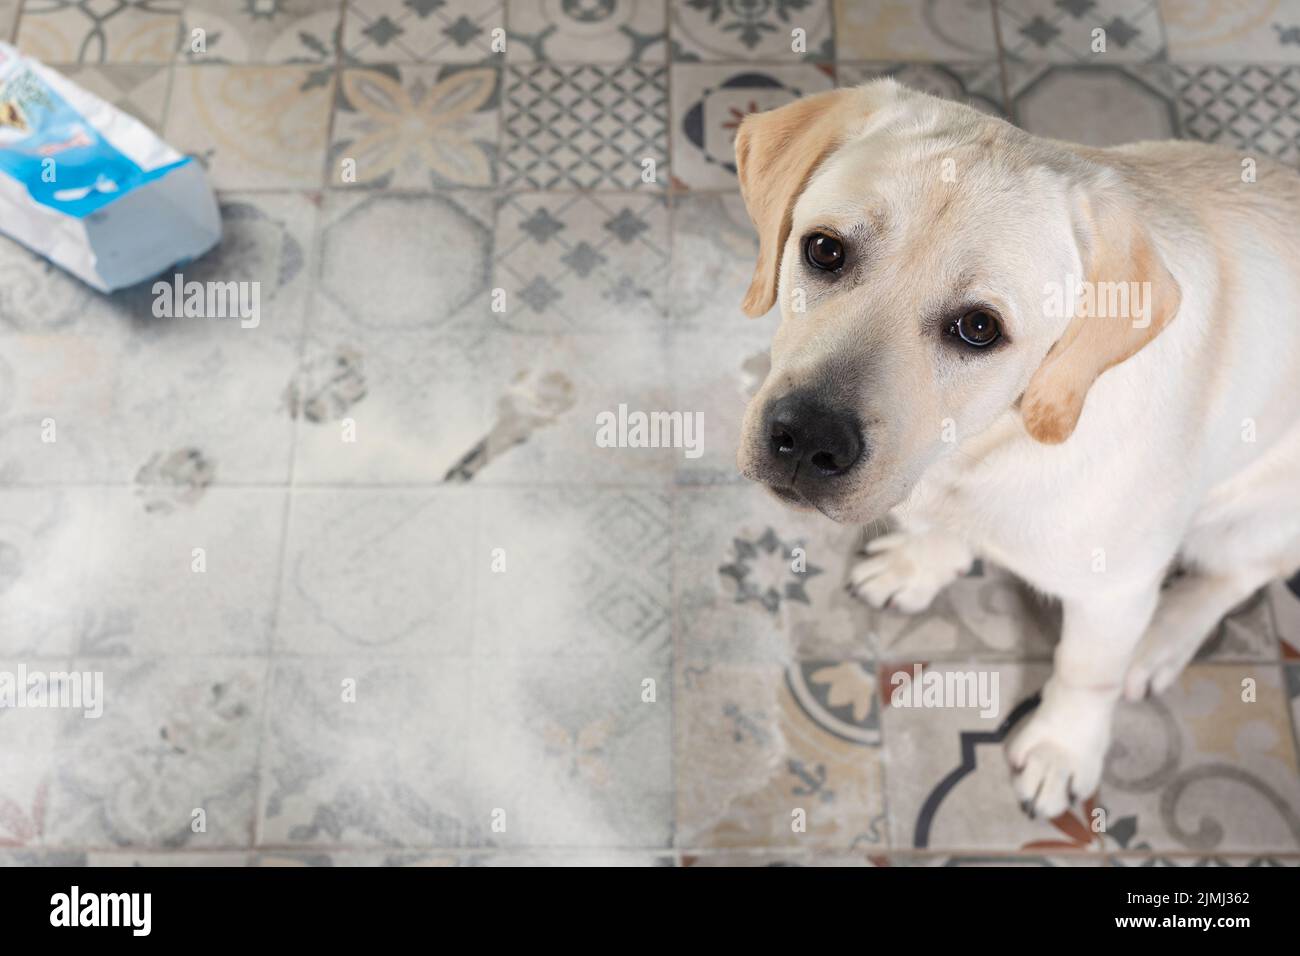 Labrador dog looking with guilty expression, sitting next to inverted packet of flour sprinkled on floor Stock Photo